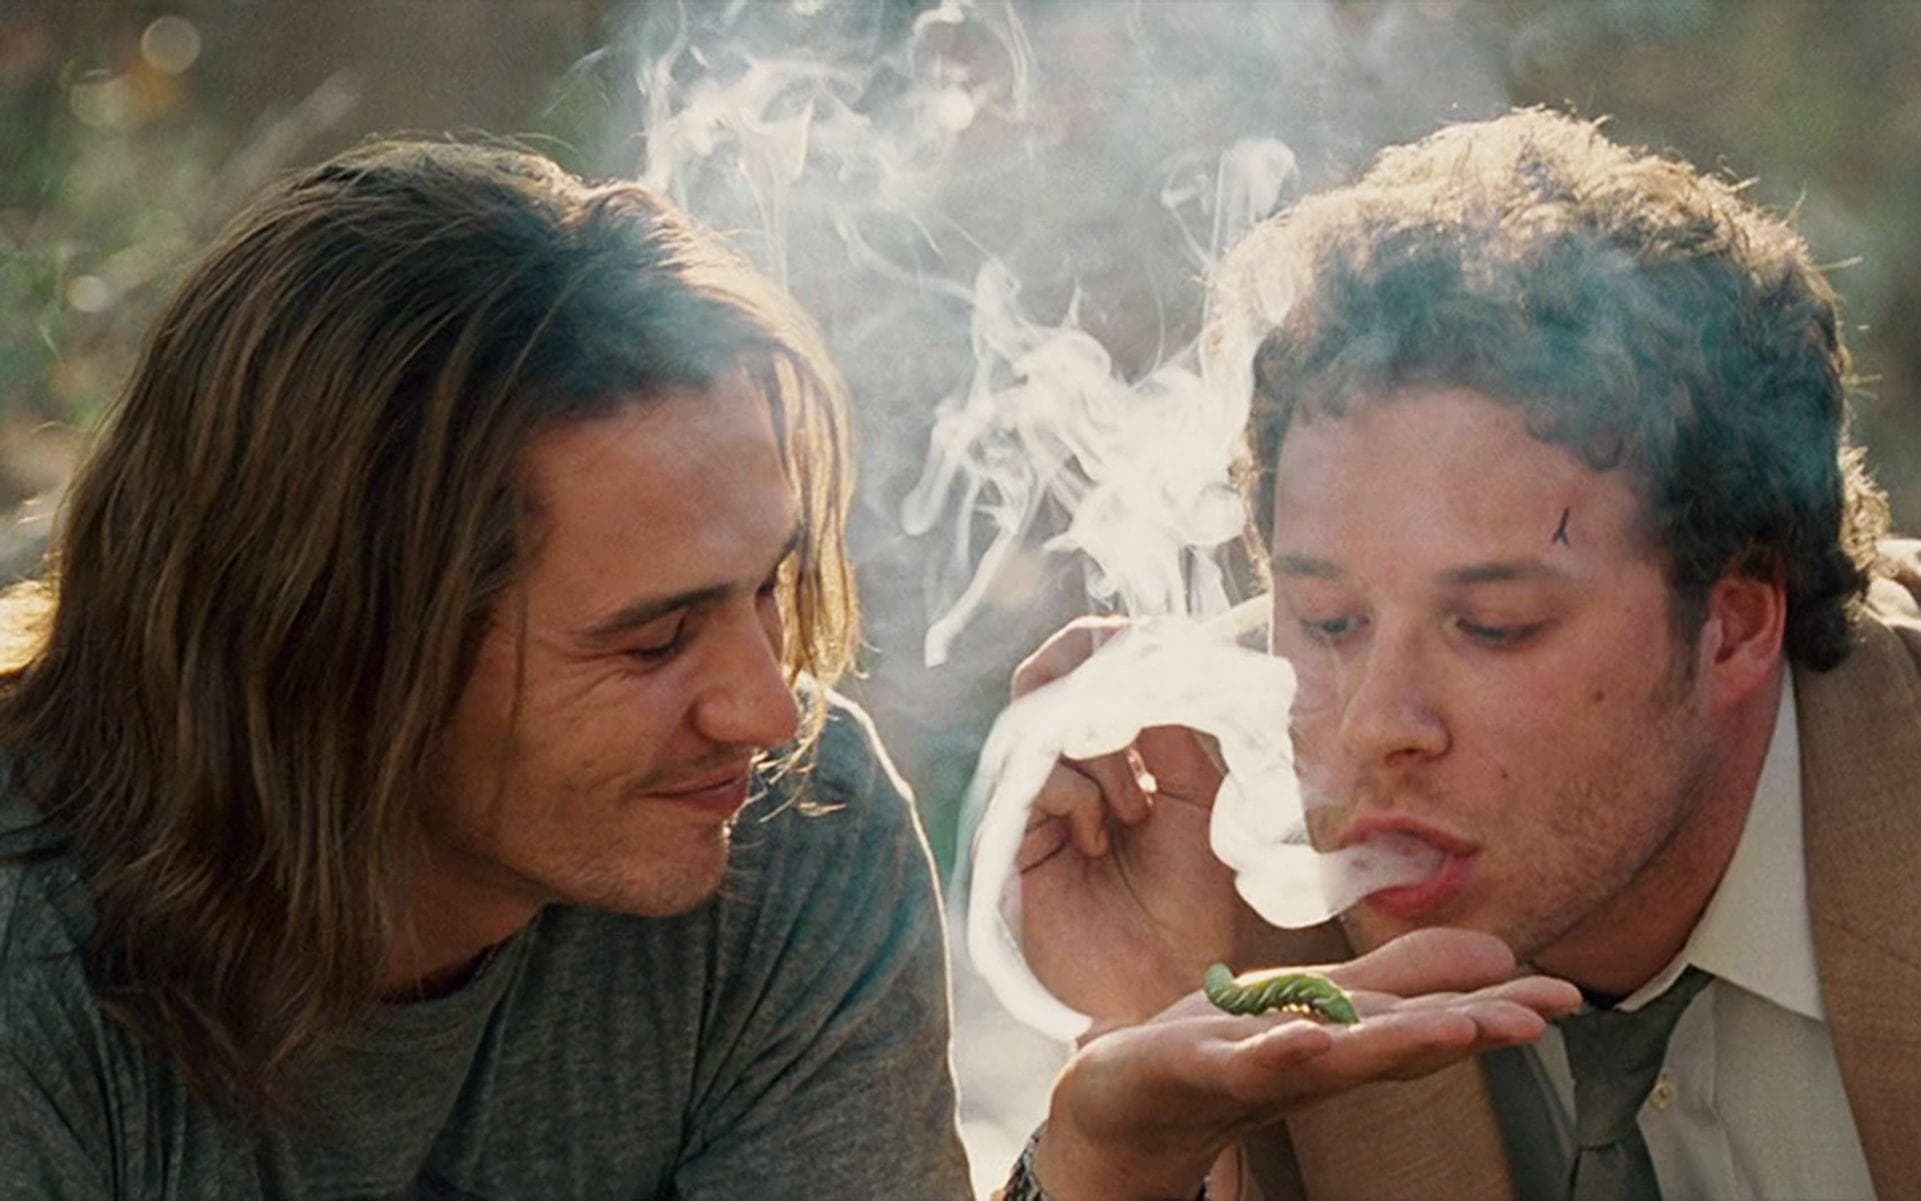 Pineapple Express' Behind-The-Scenes Stories